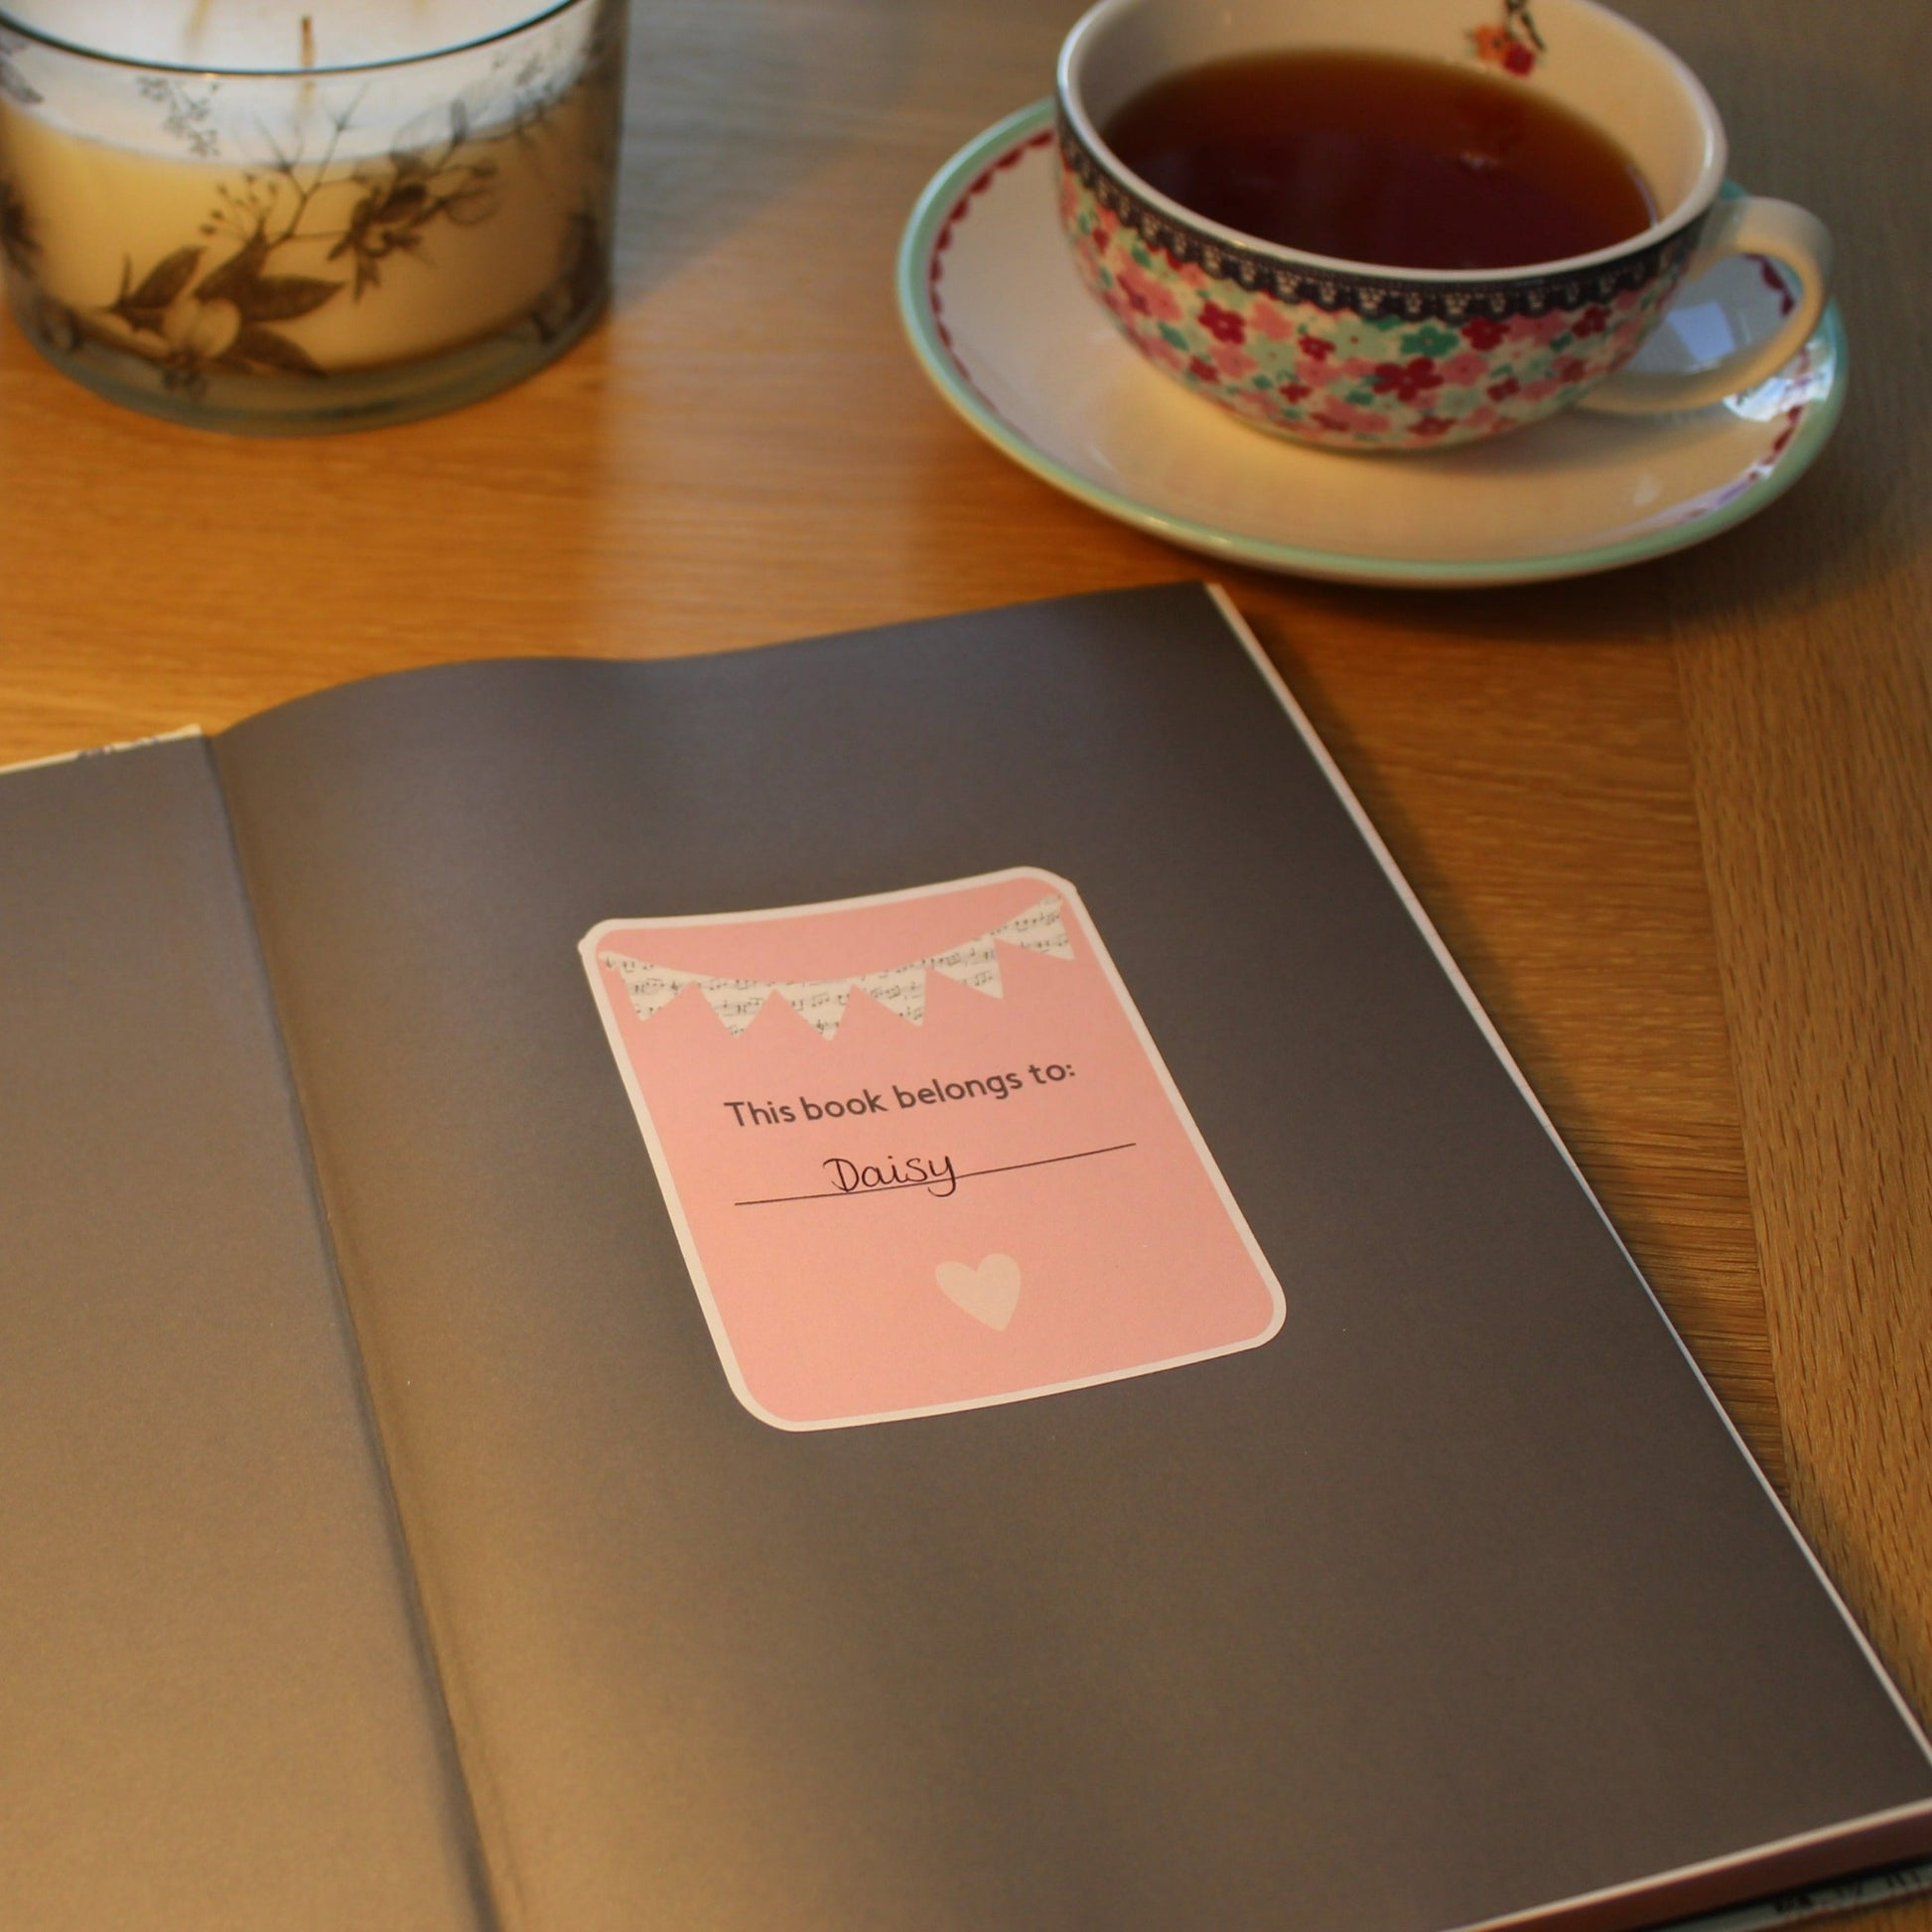 Pink bookplate with music bunting displayed in the front of a book. A cup of tea in the background